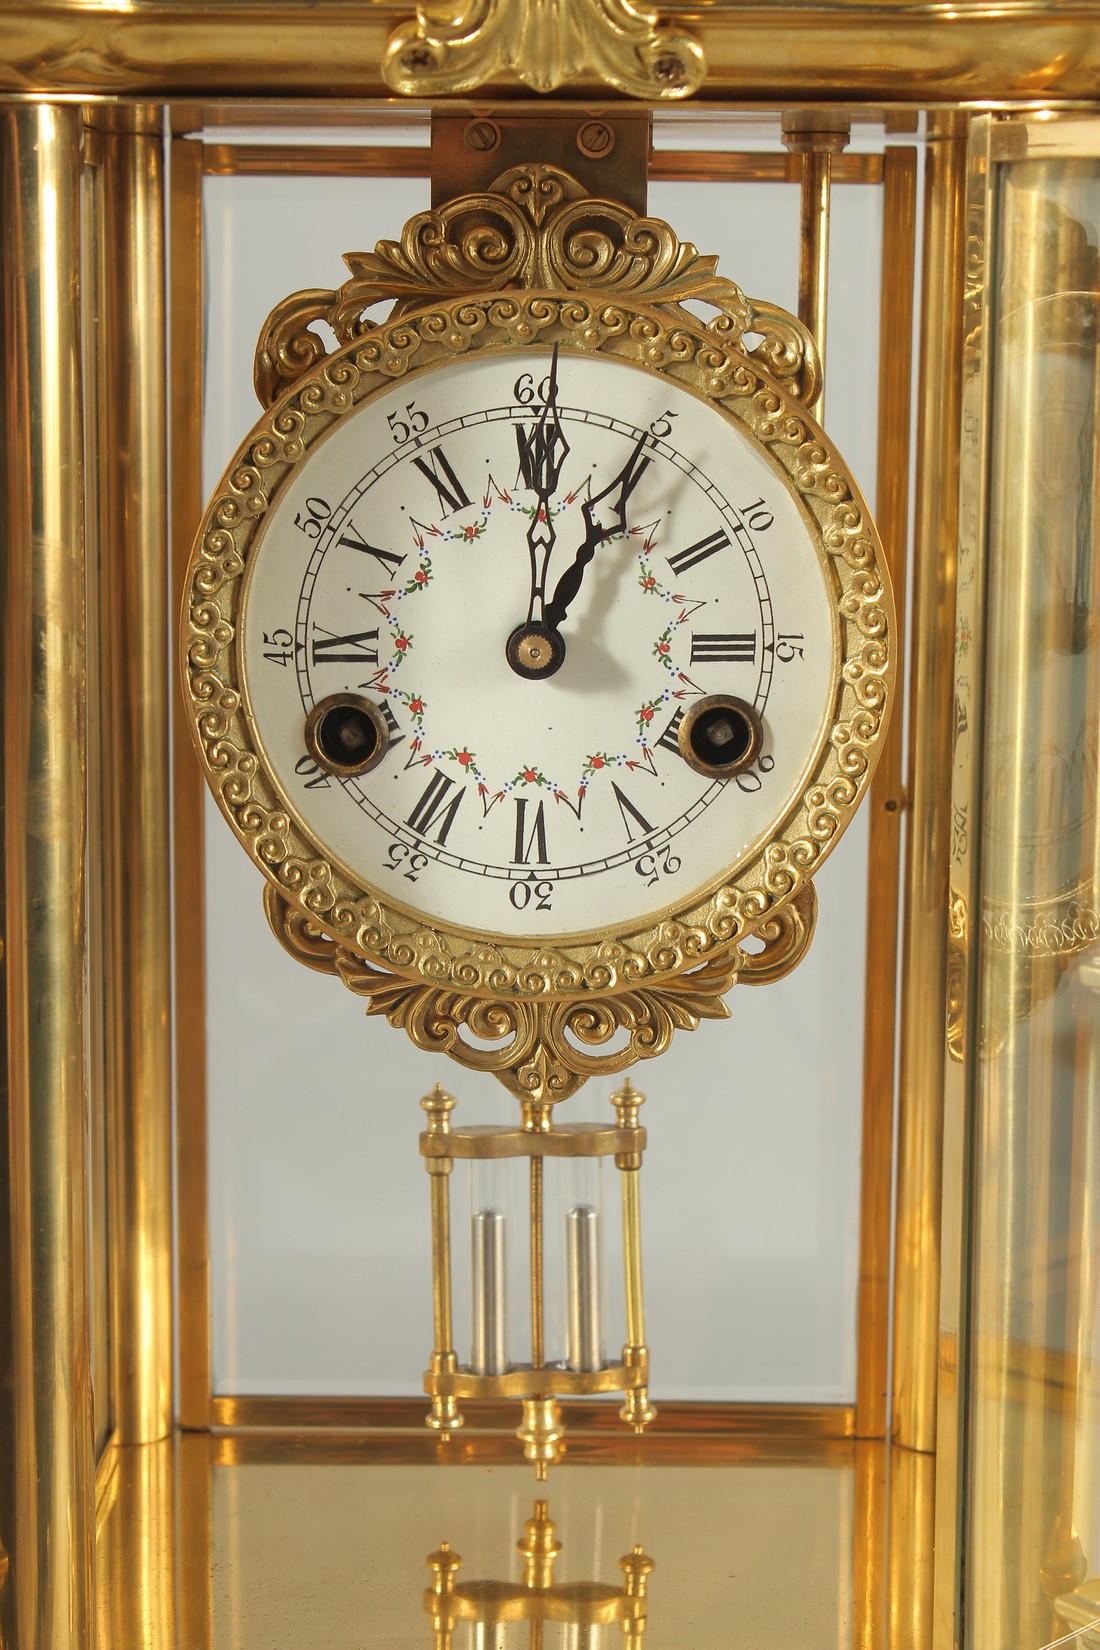 A GOOD GILT BRONZE FOUR GLASS CLOCK with pineapple finials on claw feet. 24ins high. - Image 2 of 5